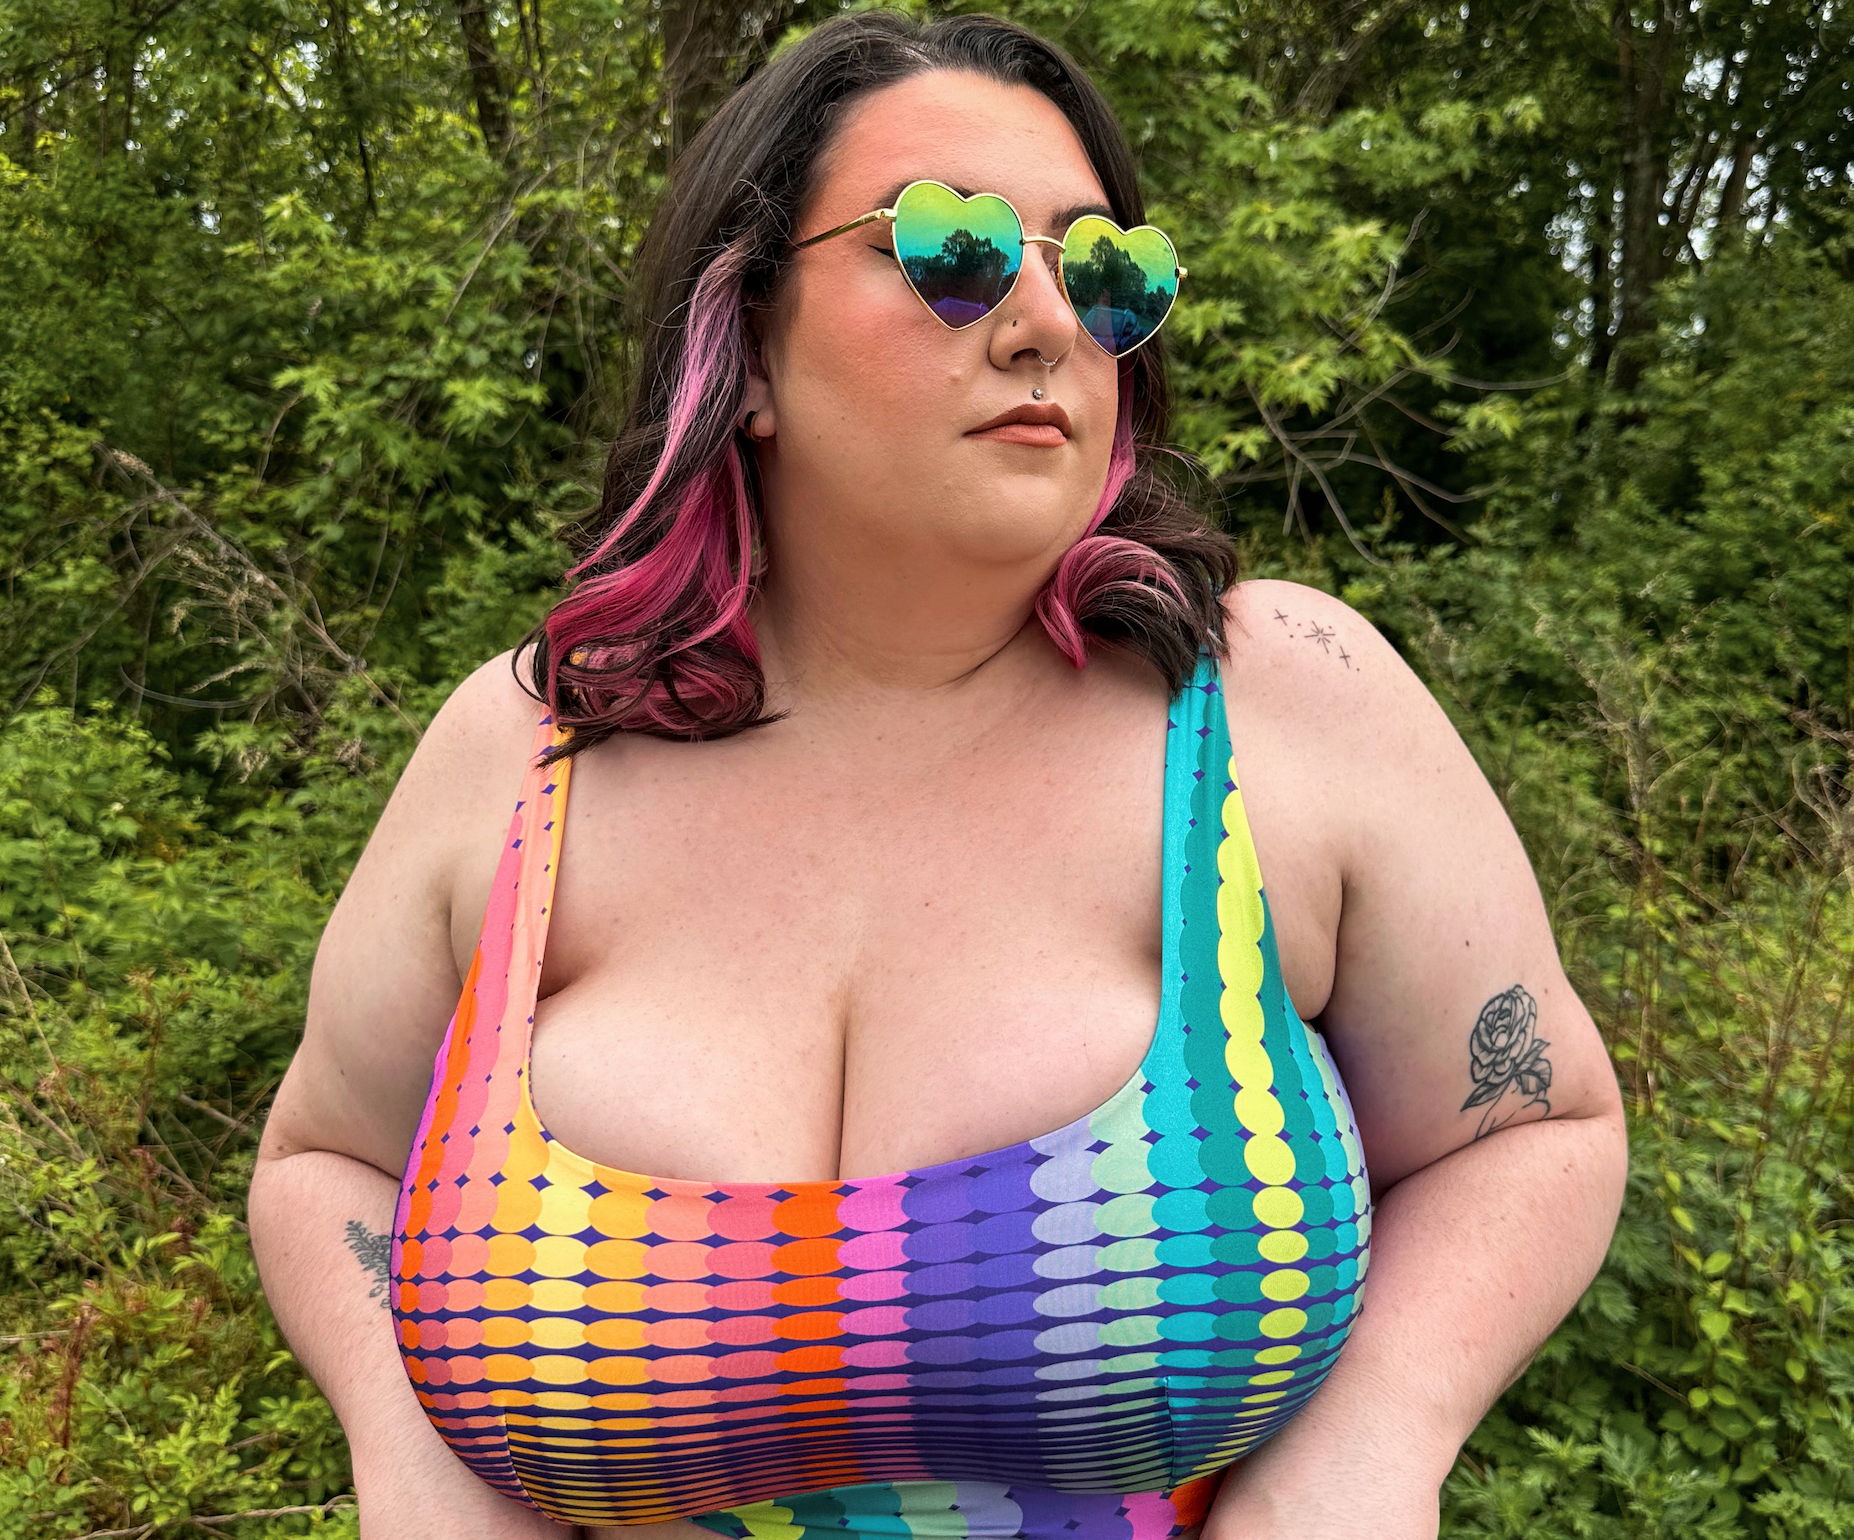 POV Plus-size and proud picture